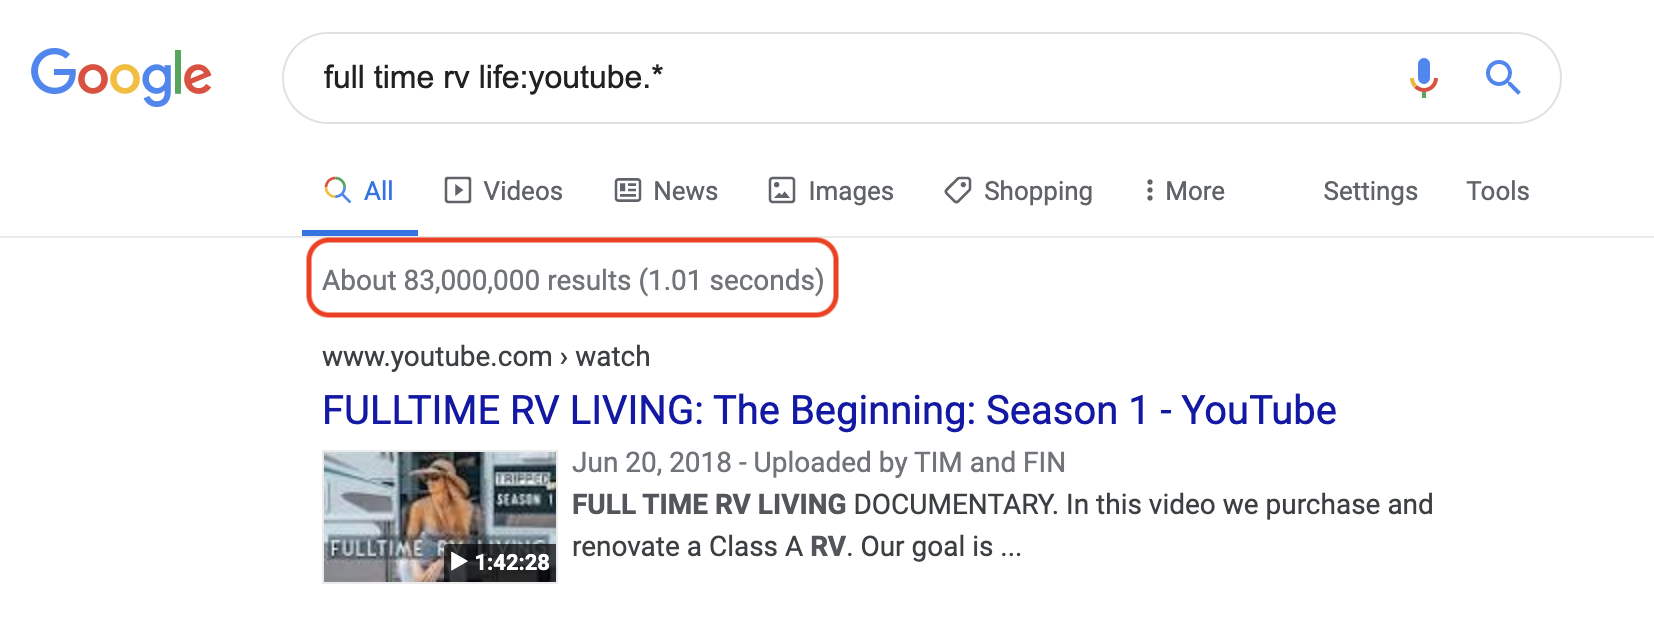 SEO For YouTube: How To Get More Views On YouTube for Free 83